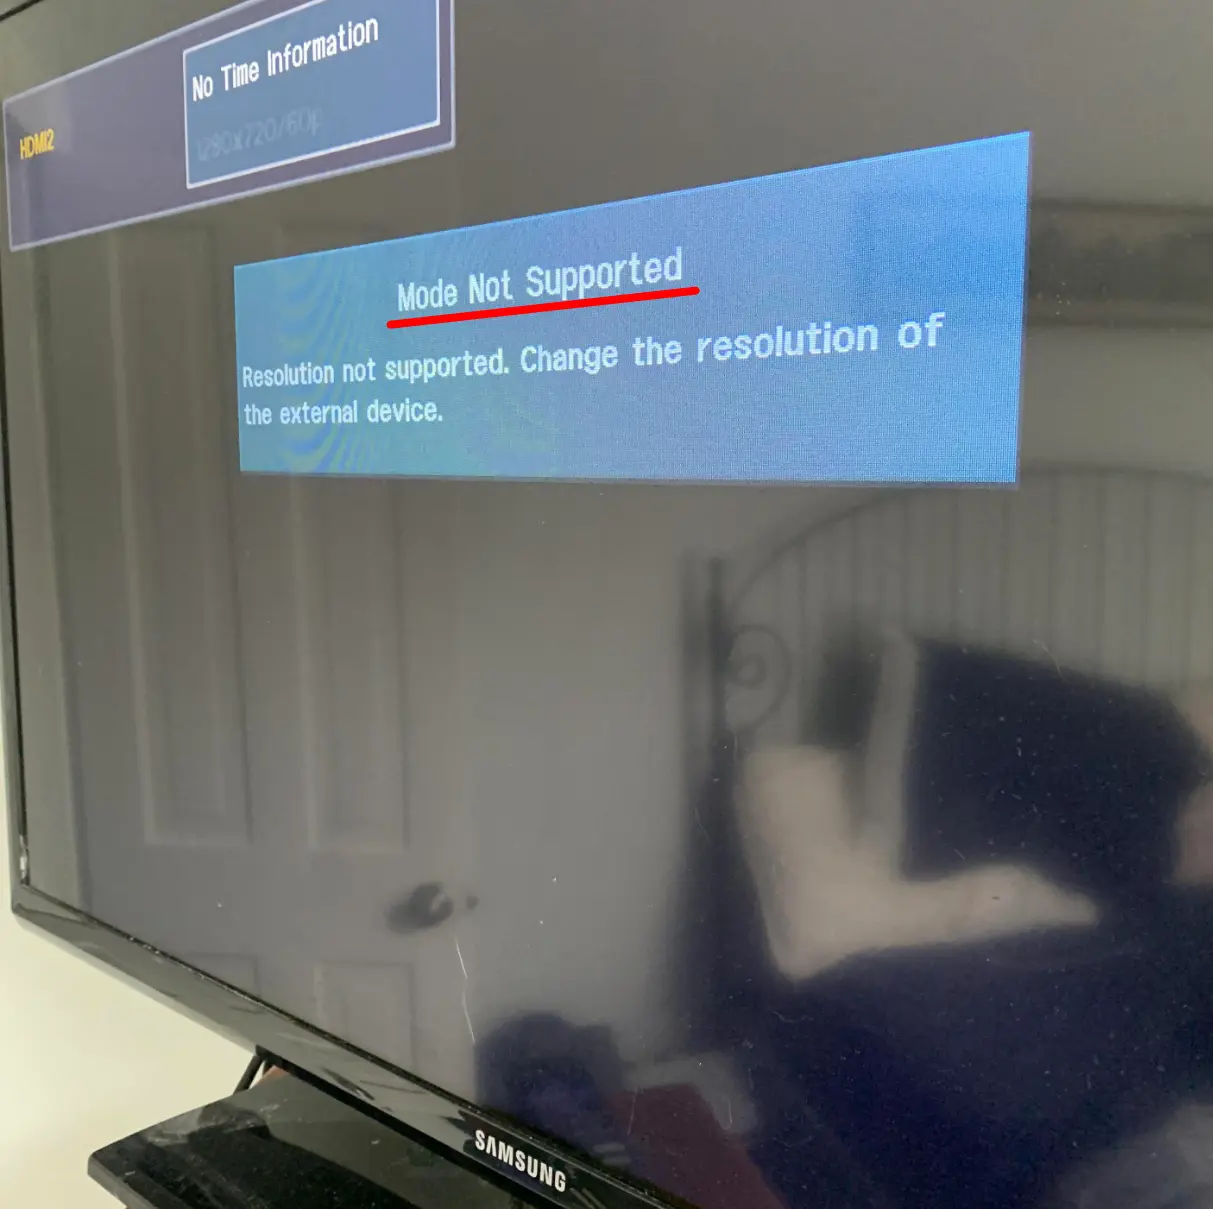 Mode not supported error on Samsung smart TV